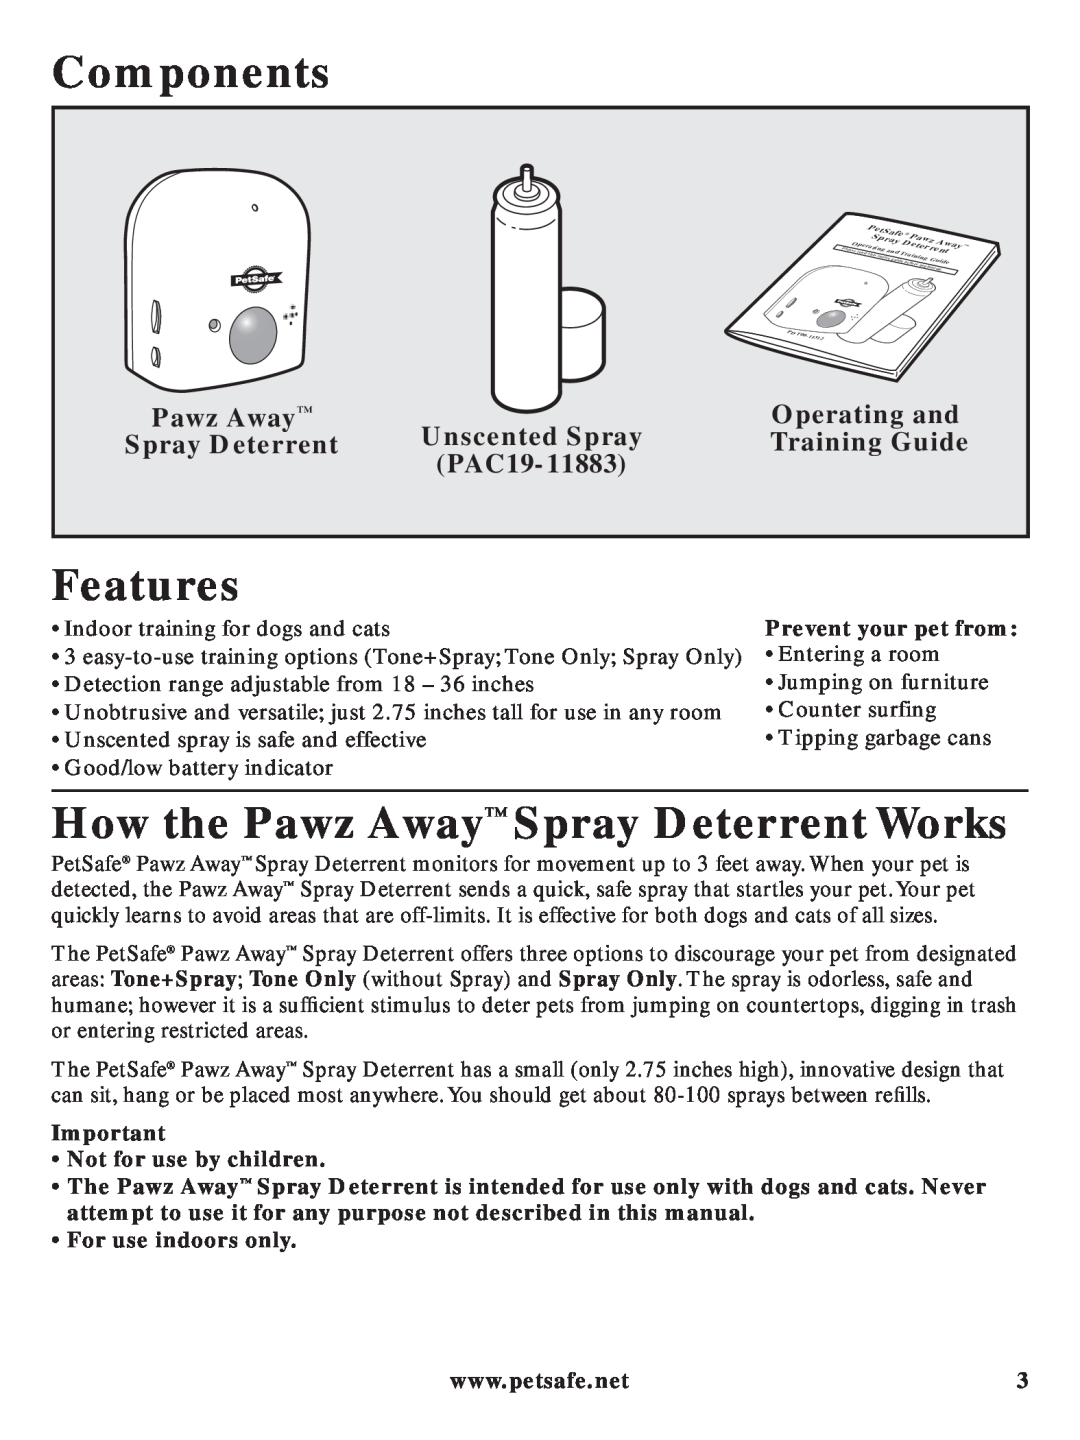 Petsafe PDT00-11312 manual Components, Features, How the Pawz Away Spray Deterrent Works, PAC19-11883 